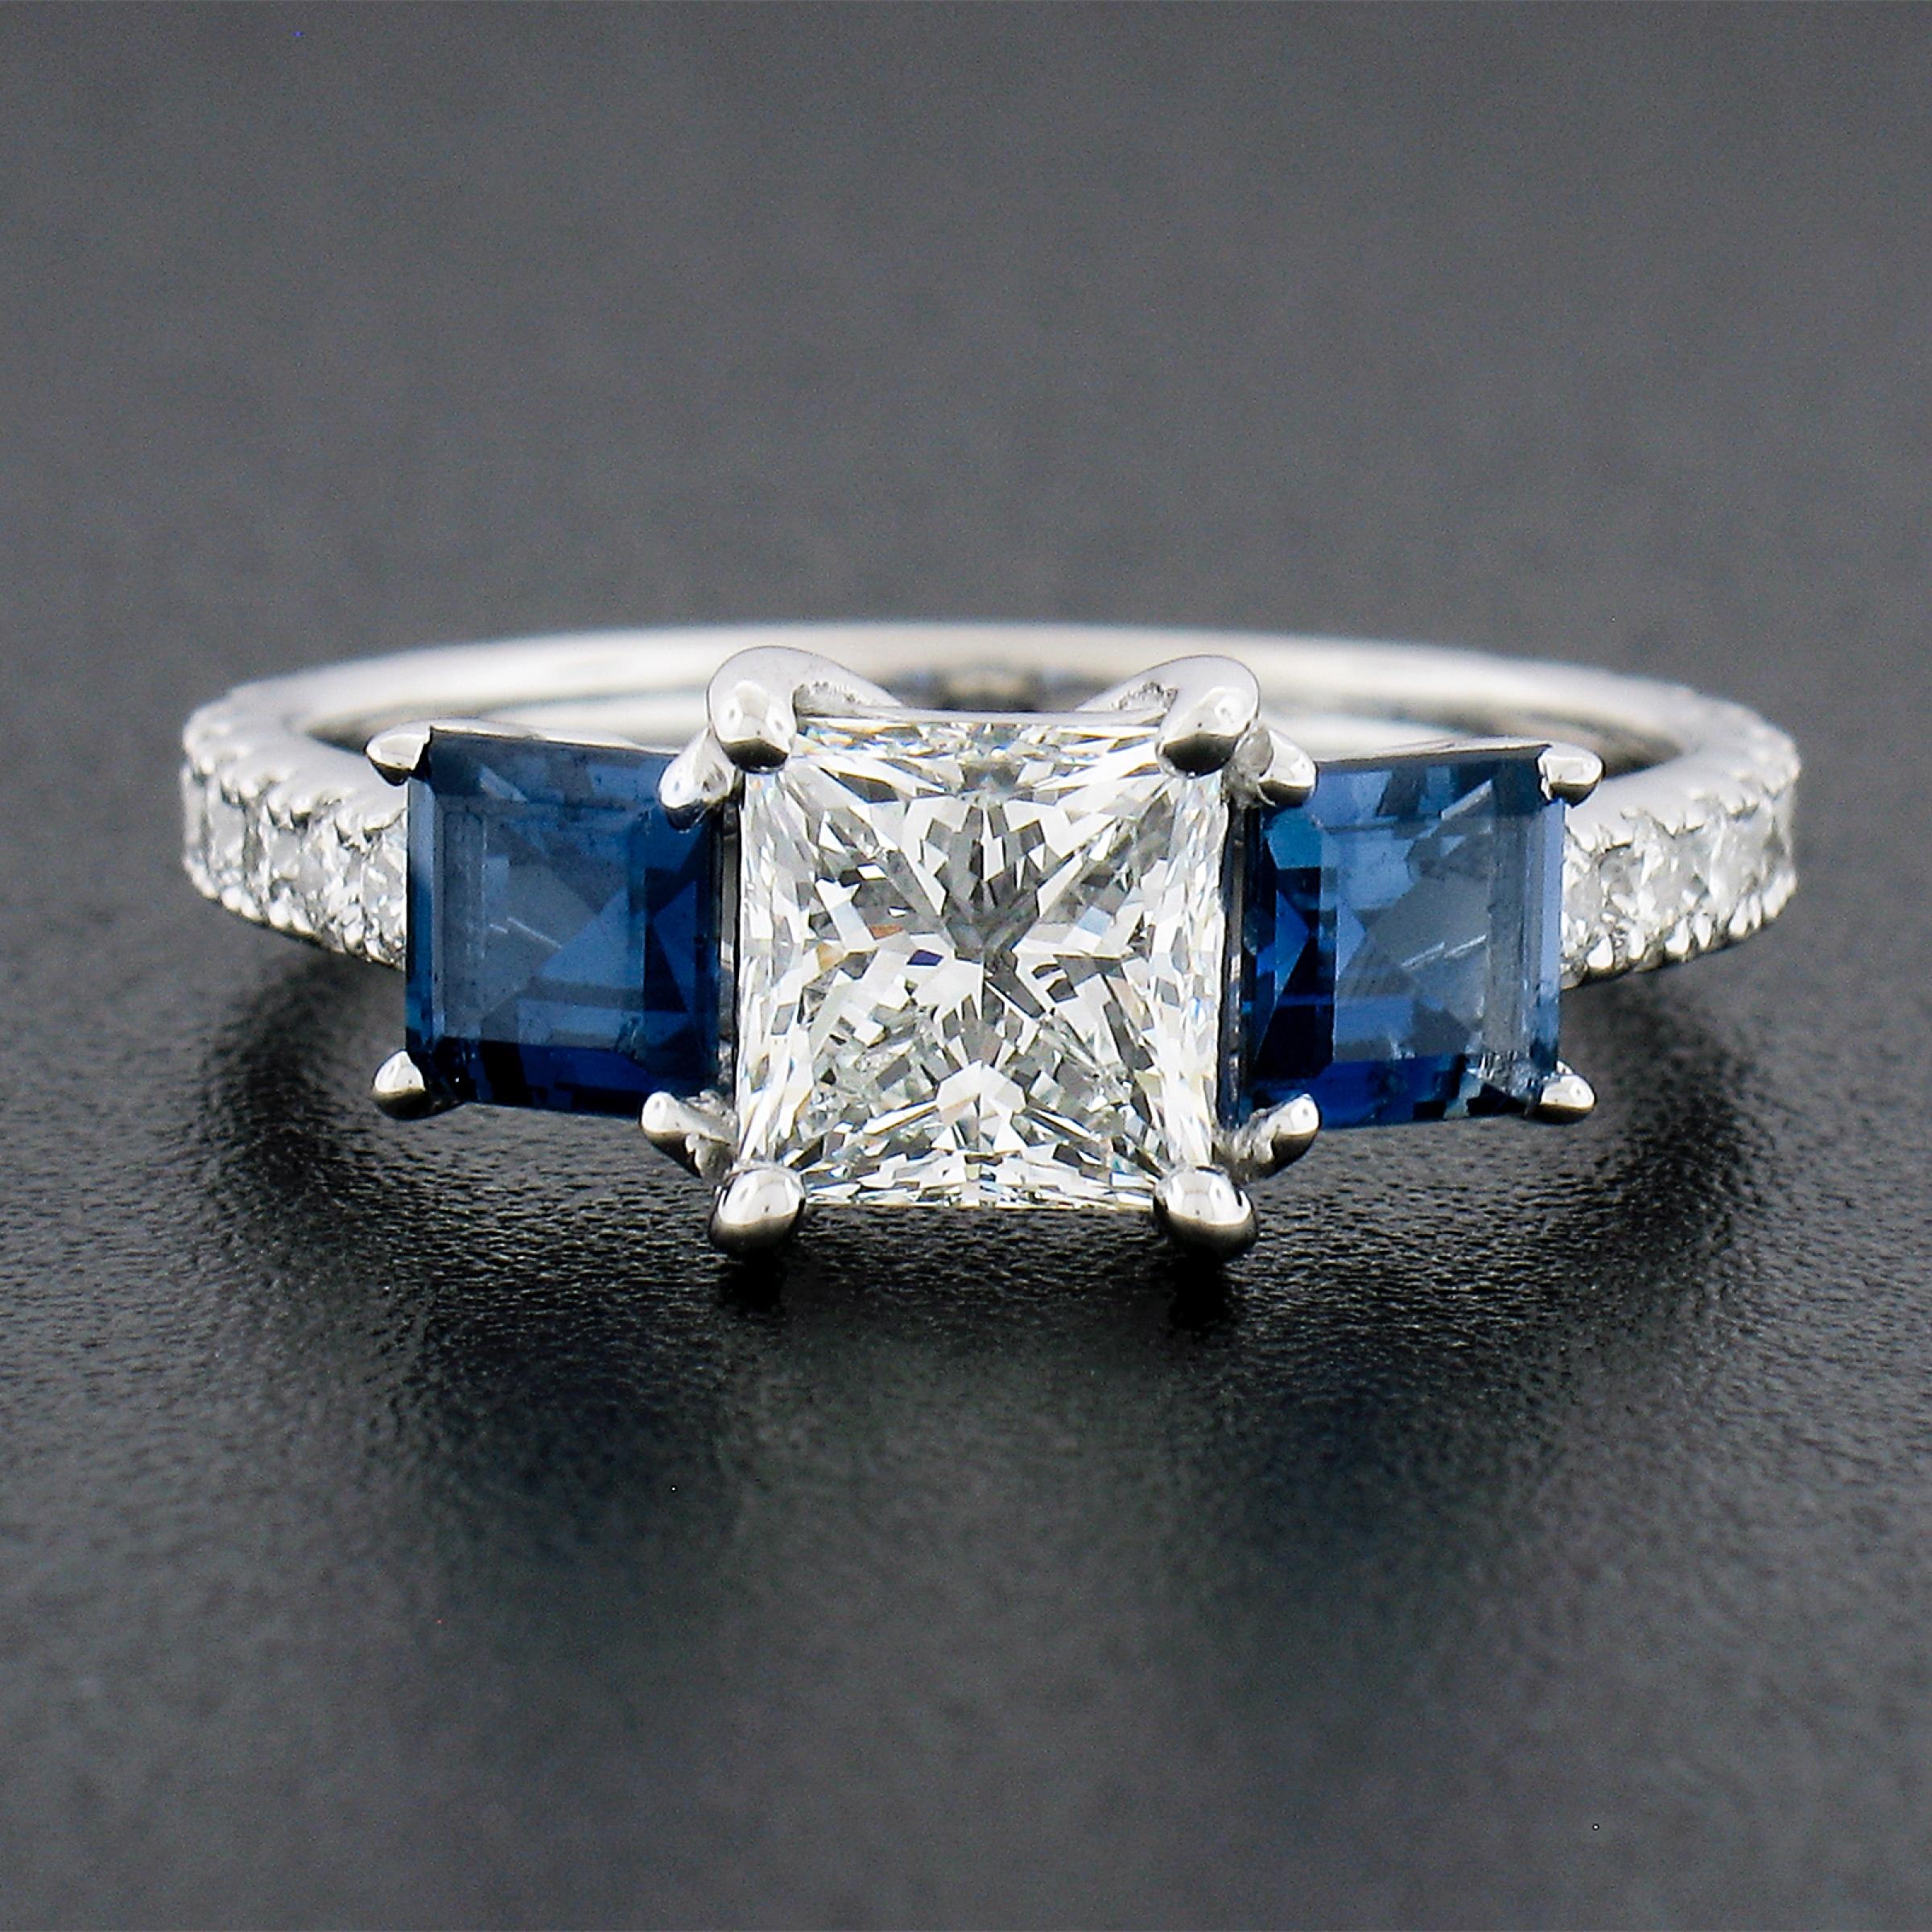 New Platinum GIA 2.58ctw Princess Diamond & Sapphire Solitaire Engagement Ring In New Condition For Sale In Montclair, NJ